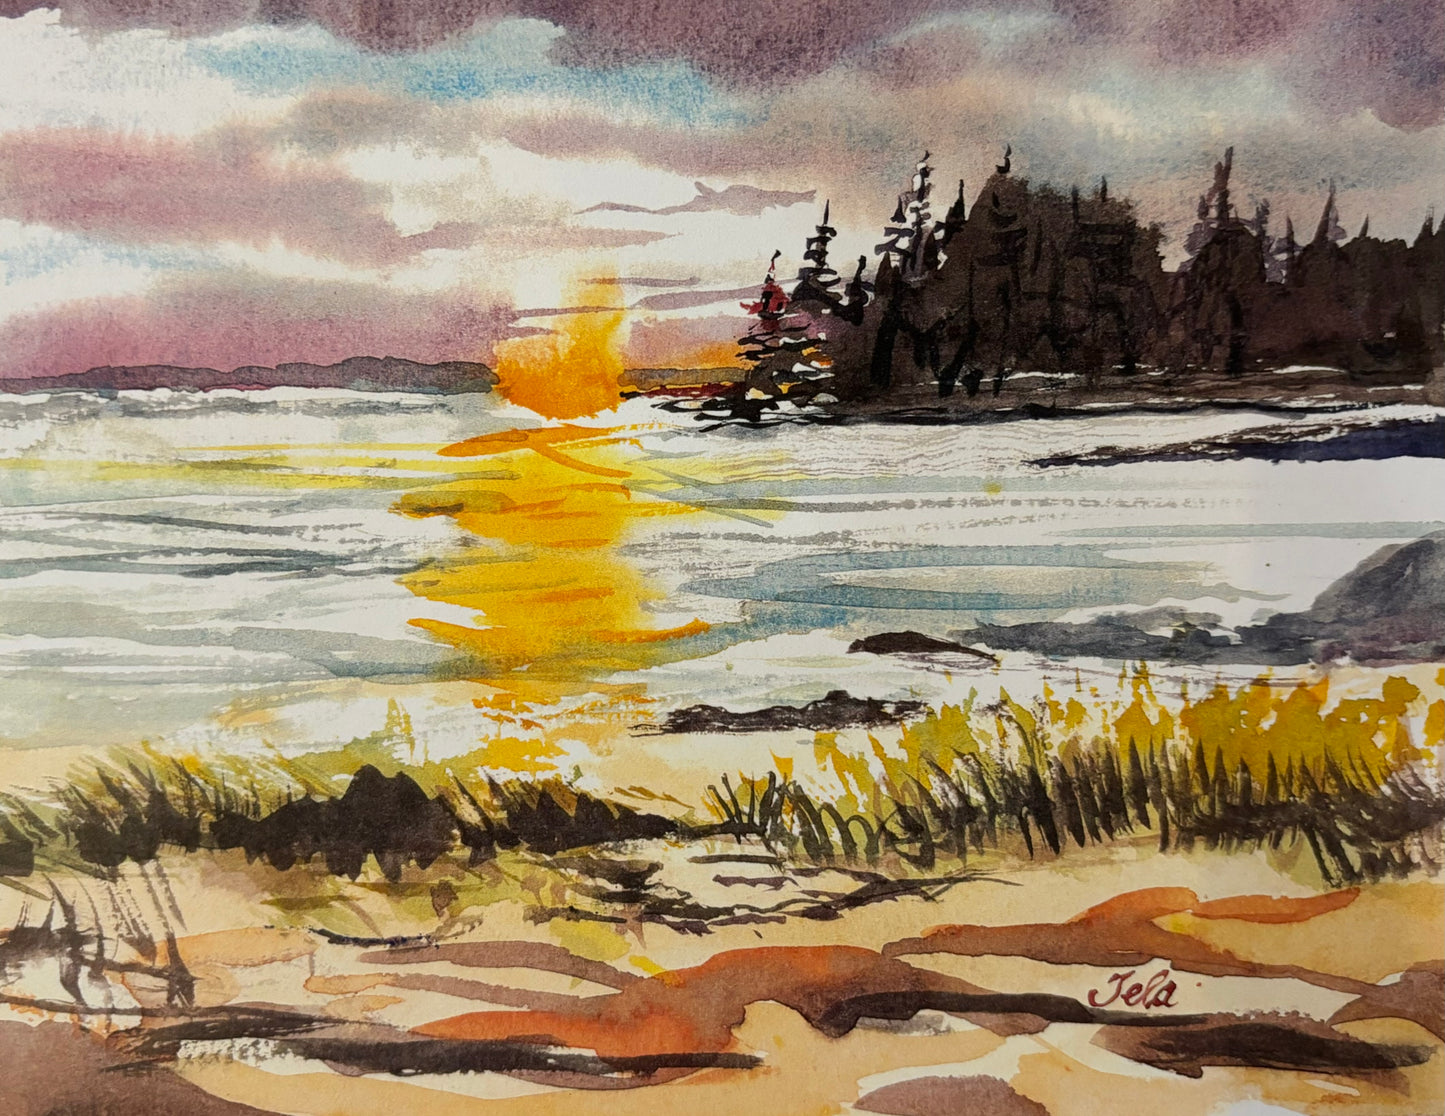 Sunset at Battery Point Beach, A Print from a watercolour painting by Tela